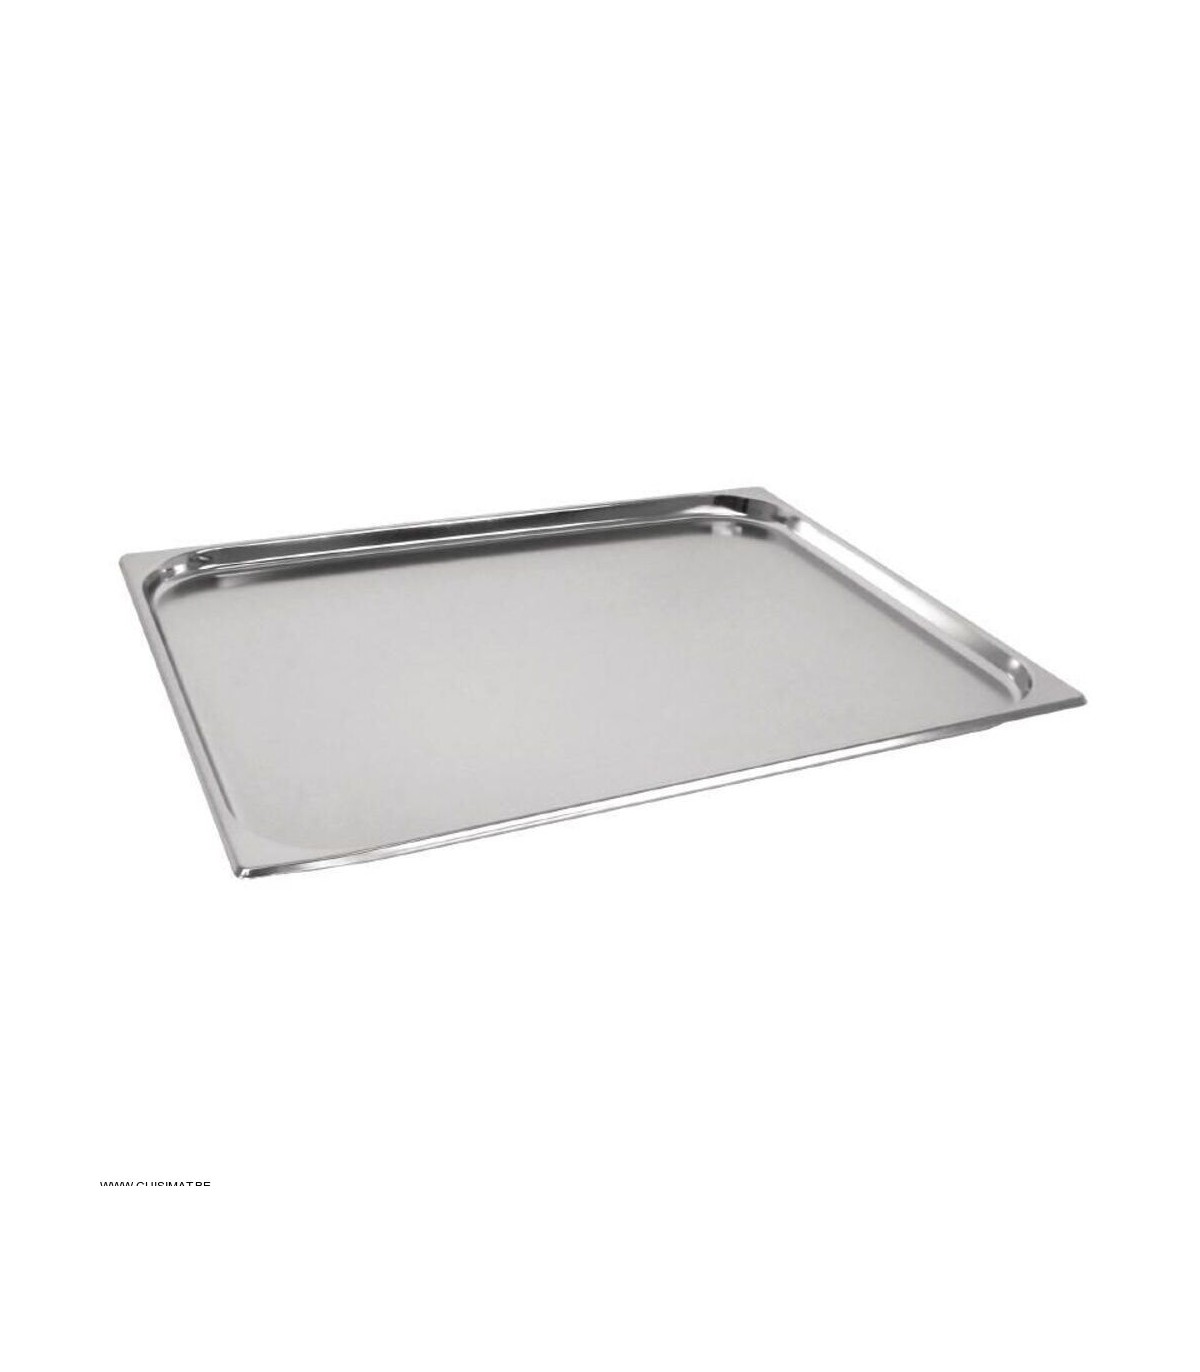 GN 2/1 (650 * 530MM) 20 MM  VOGUE dans BACS GASTRONORM ANTI-ADHESIF